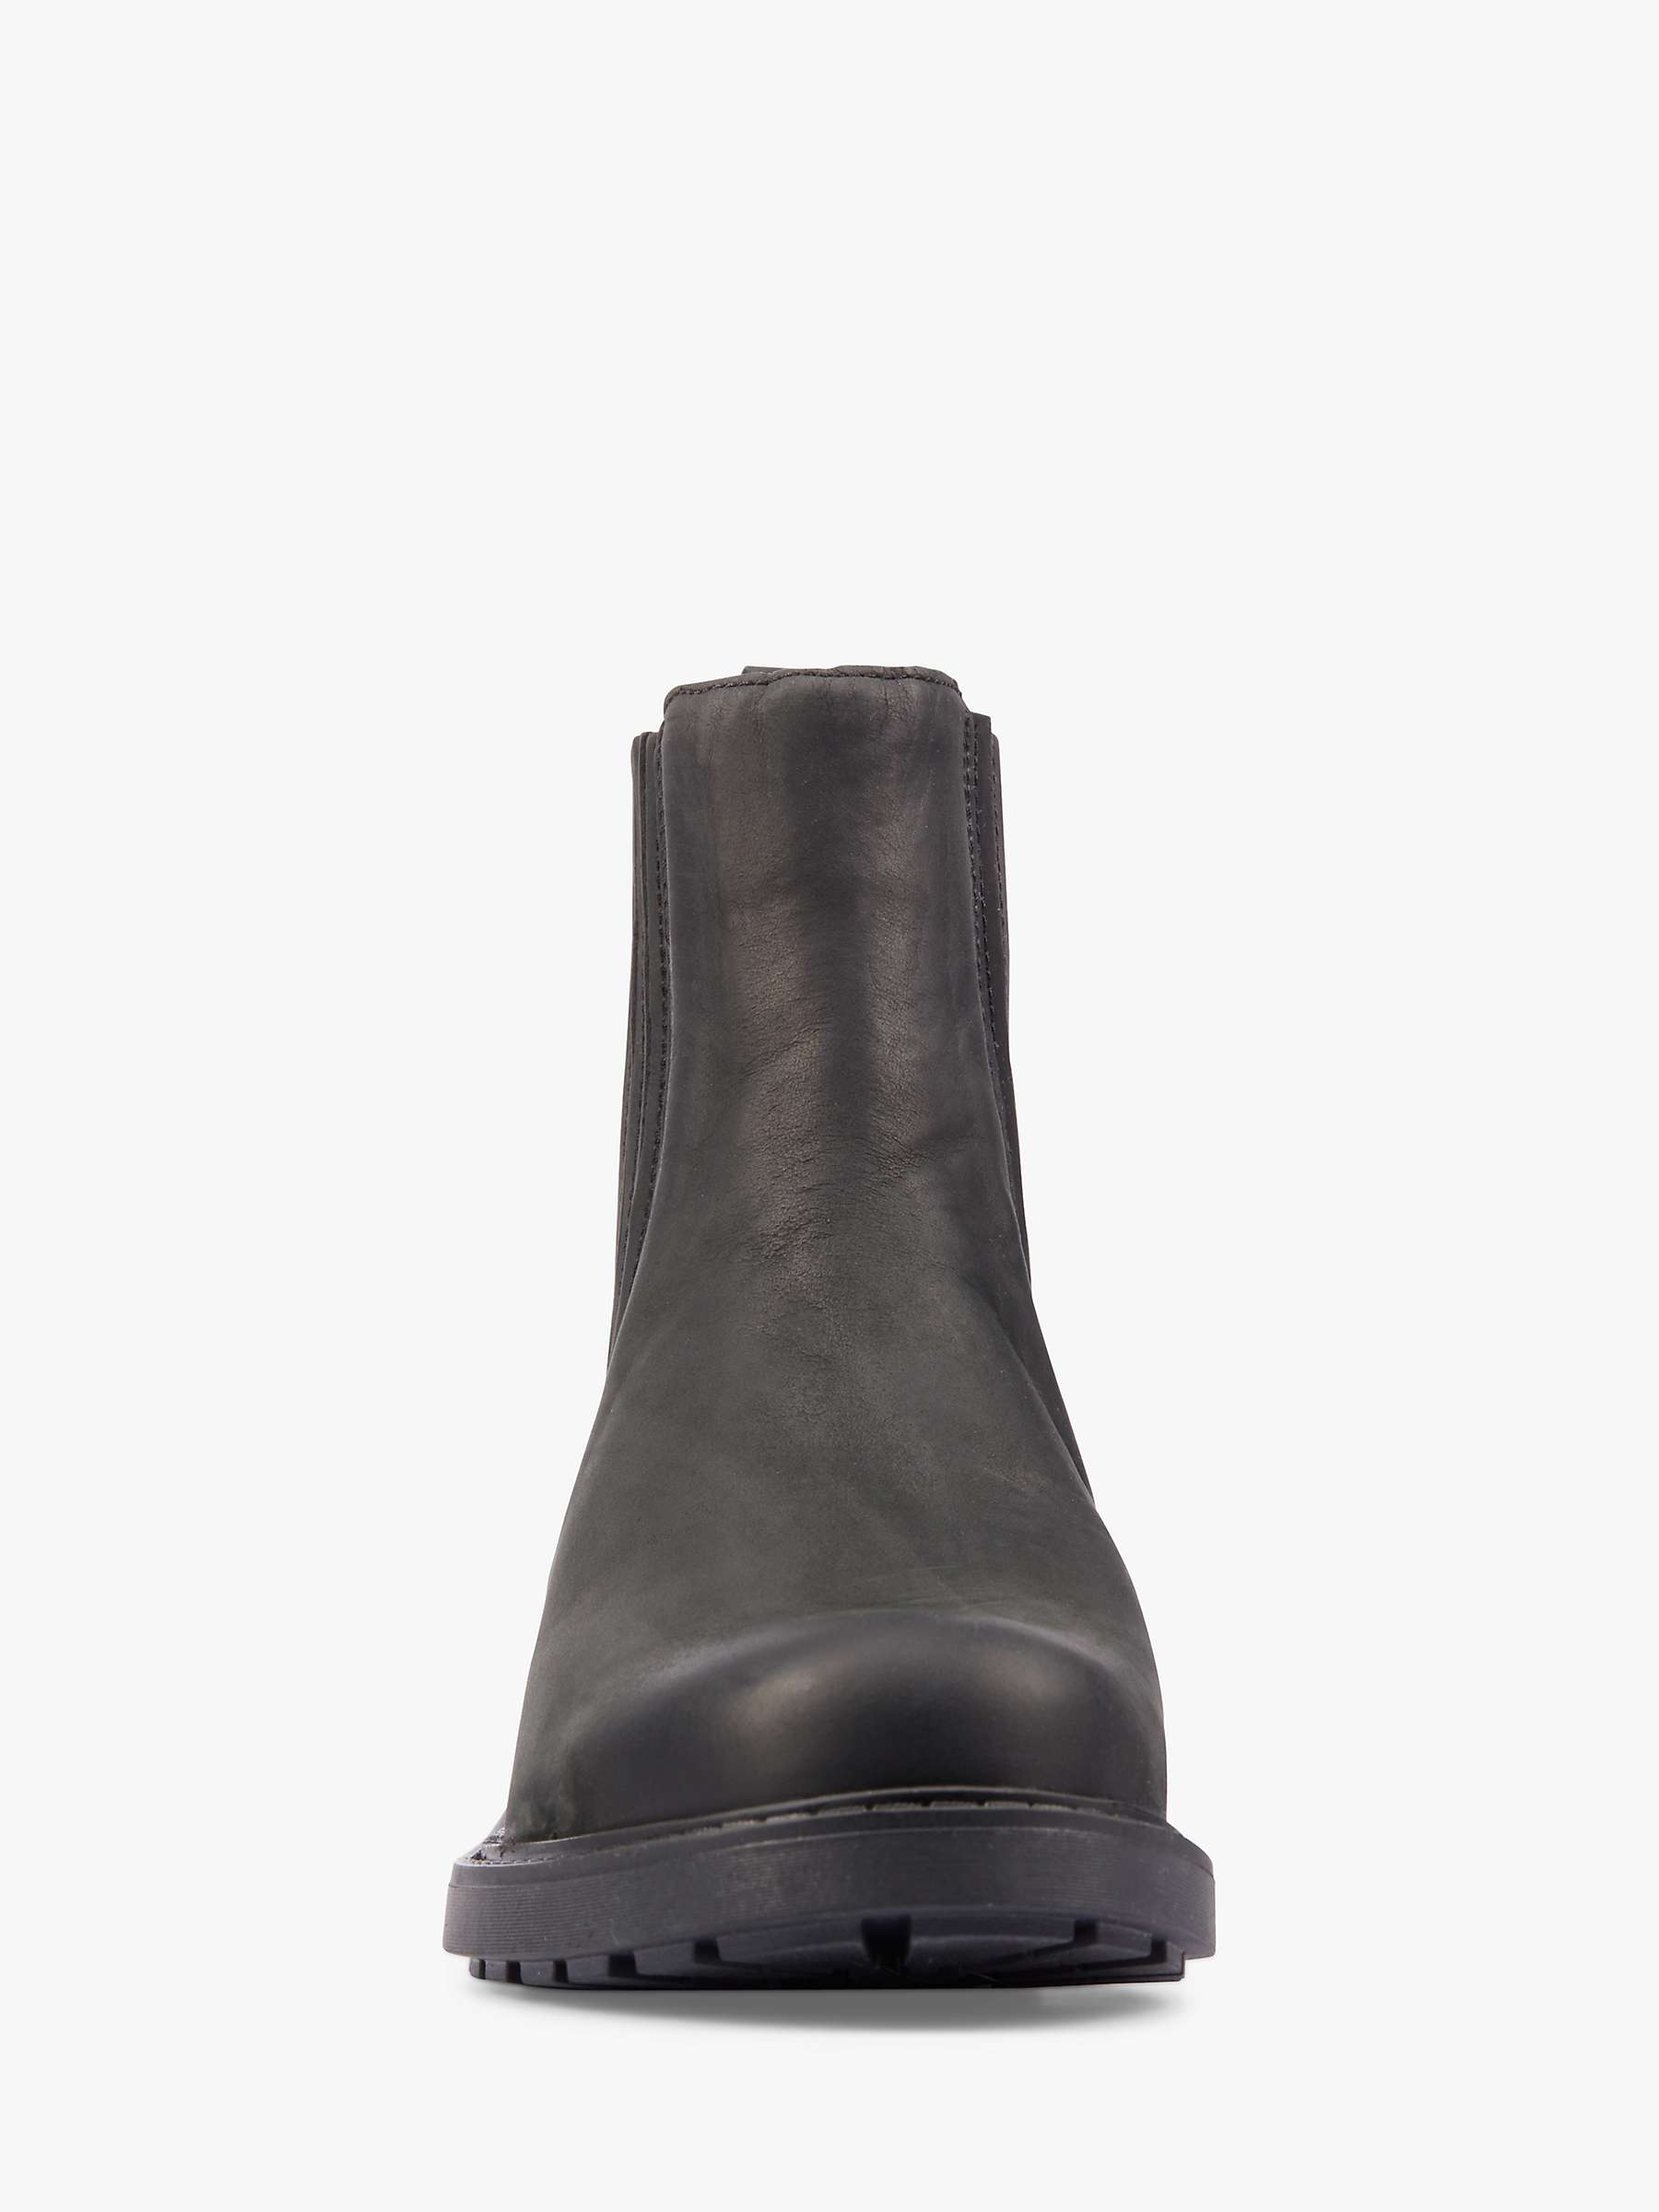 Buy Clarks Orinoco Leather Wide Fit Chelsea Boots Online at johnlewis.com